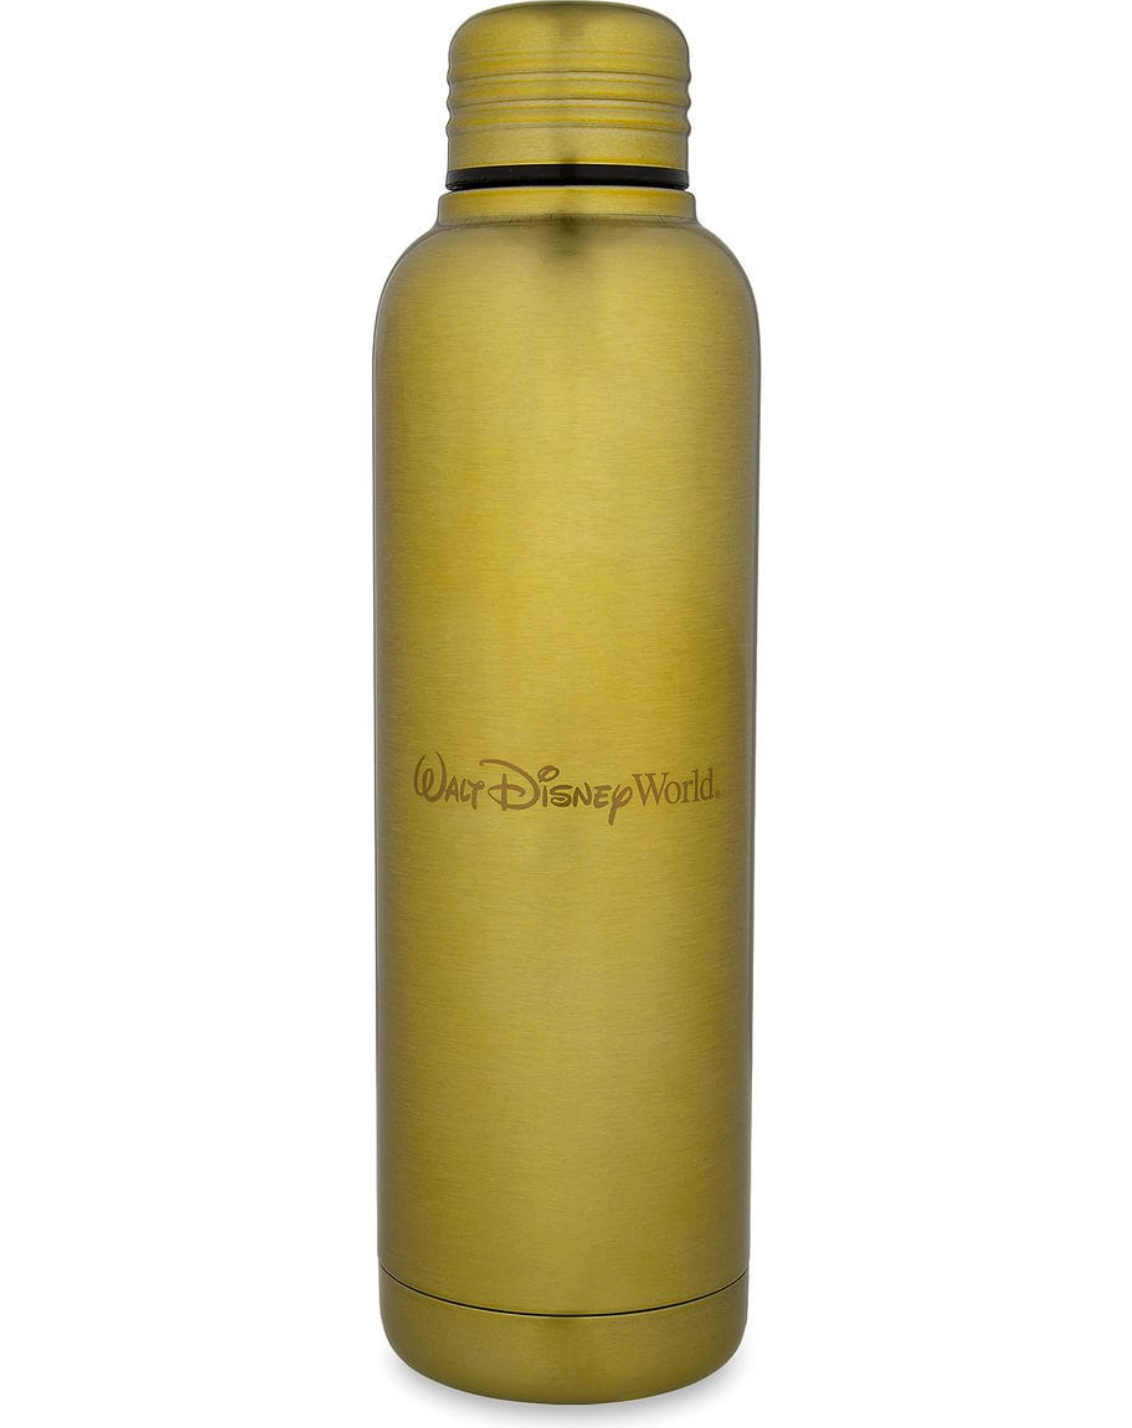 Disney Parks Cinderella Castle Most Magical Place on Earth Water Bottle New